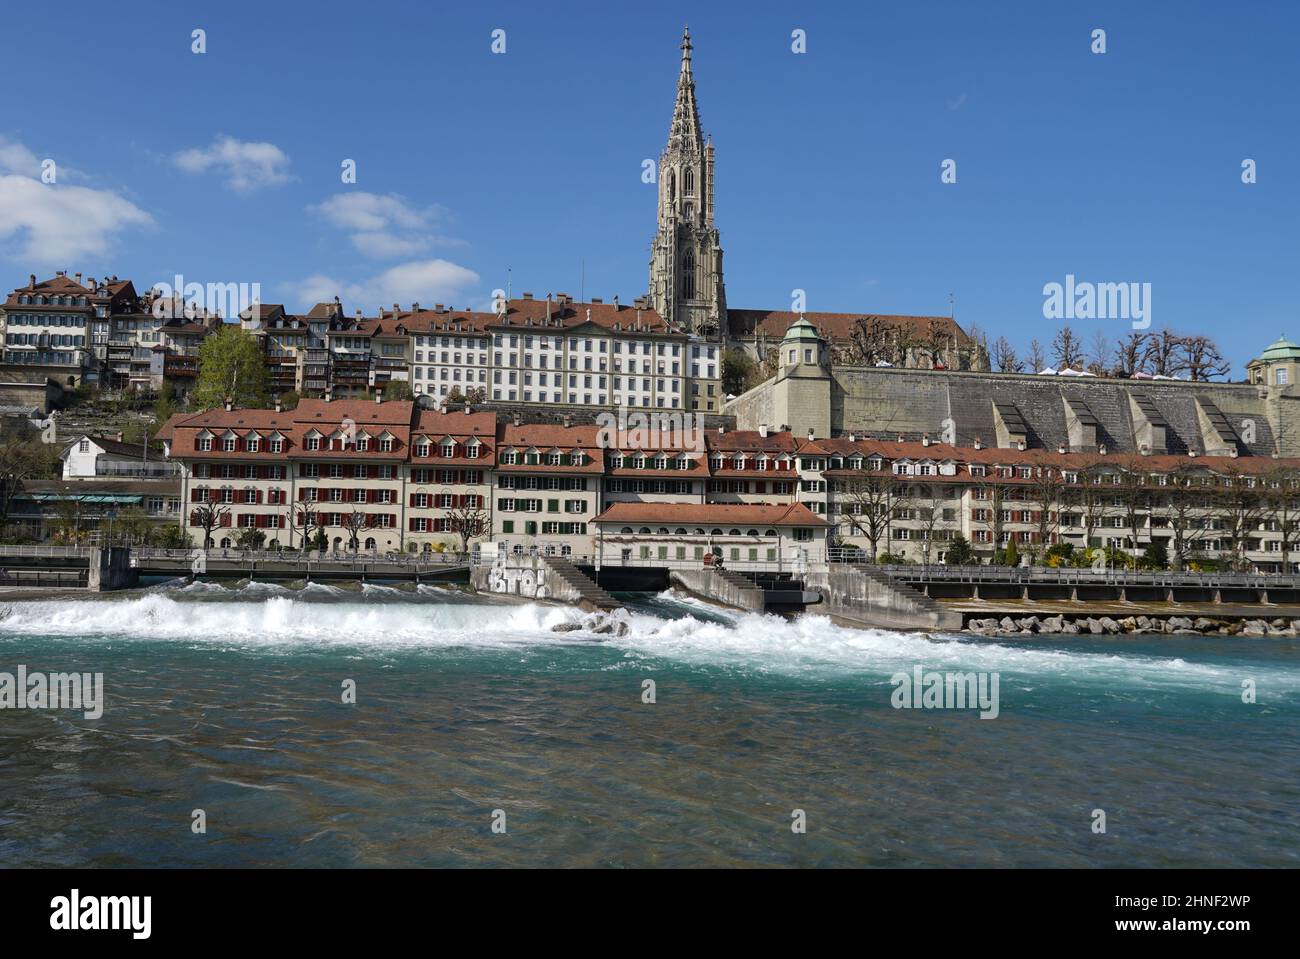 Historical architecture and city walls in Bern, Switzerland, along the Aare riverbank. Stock Photo